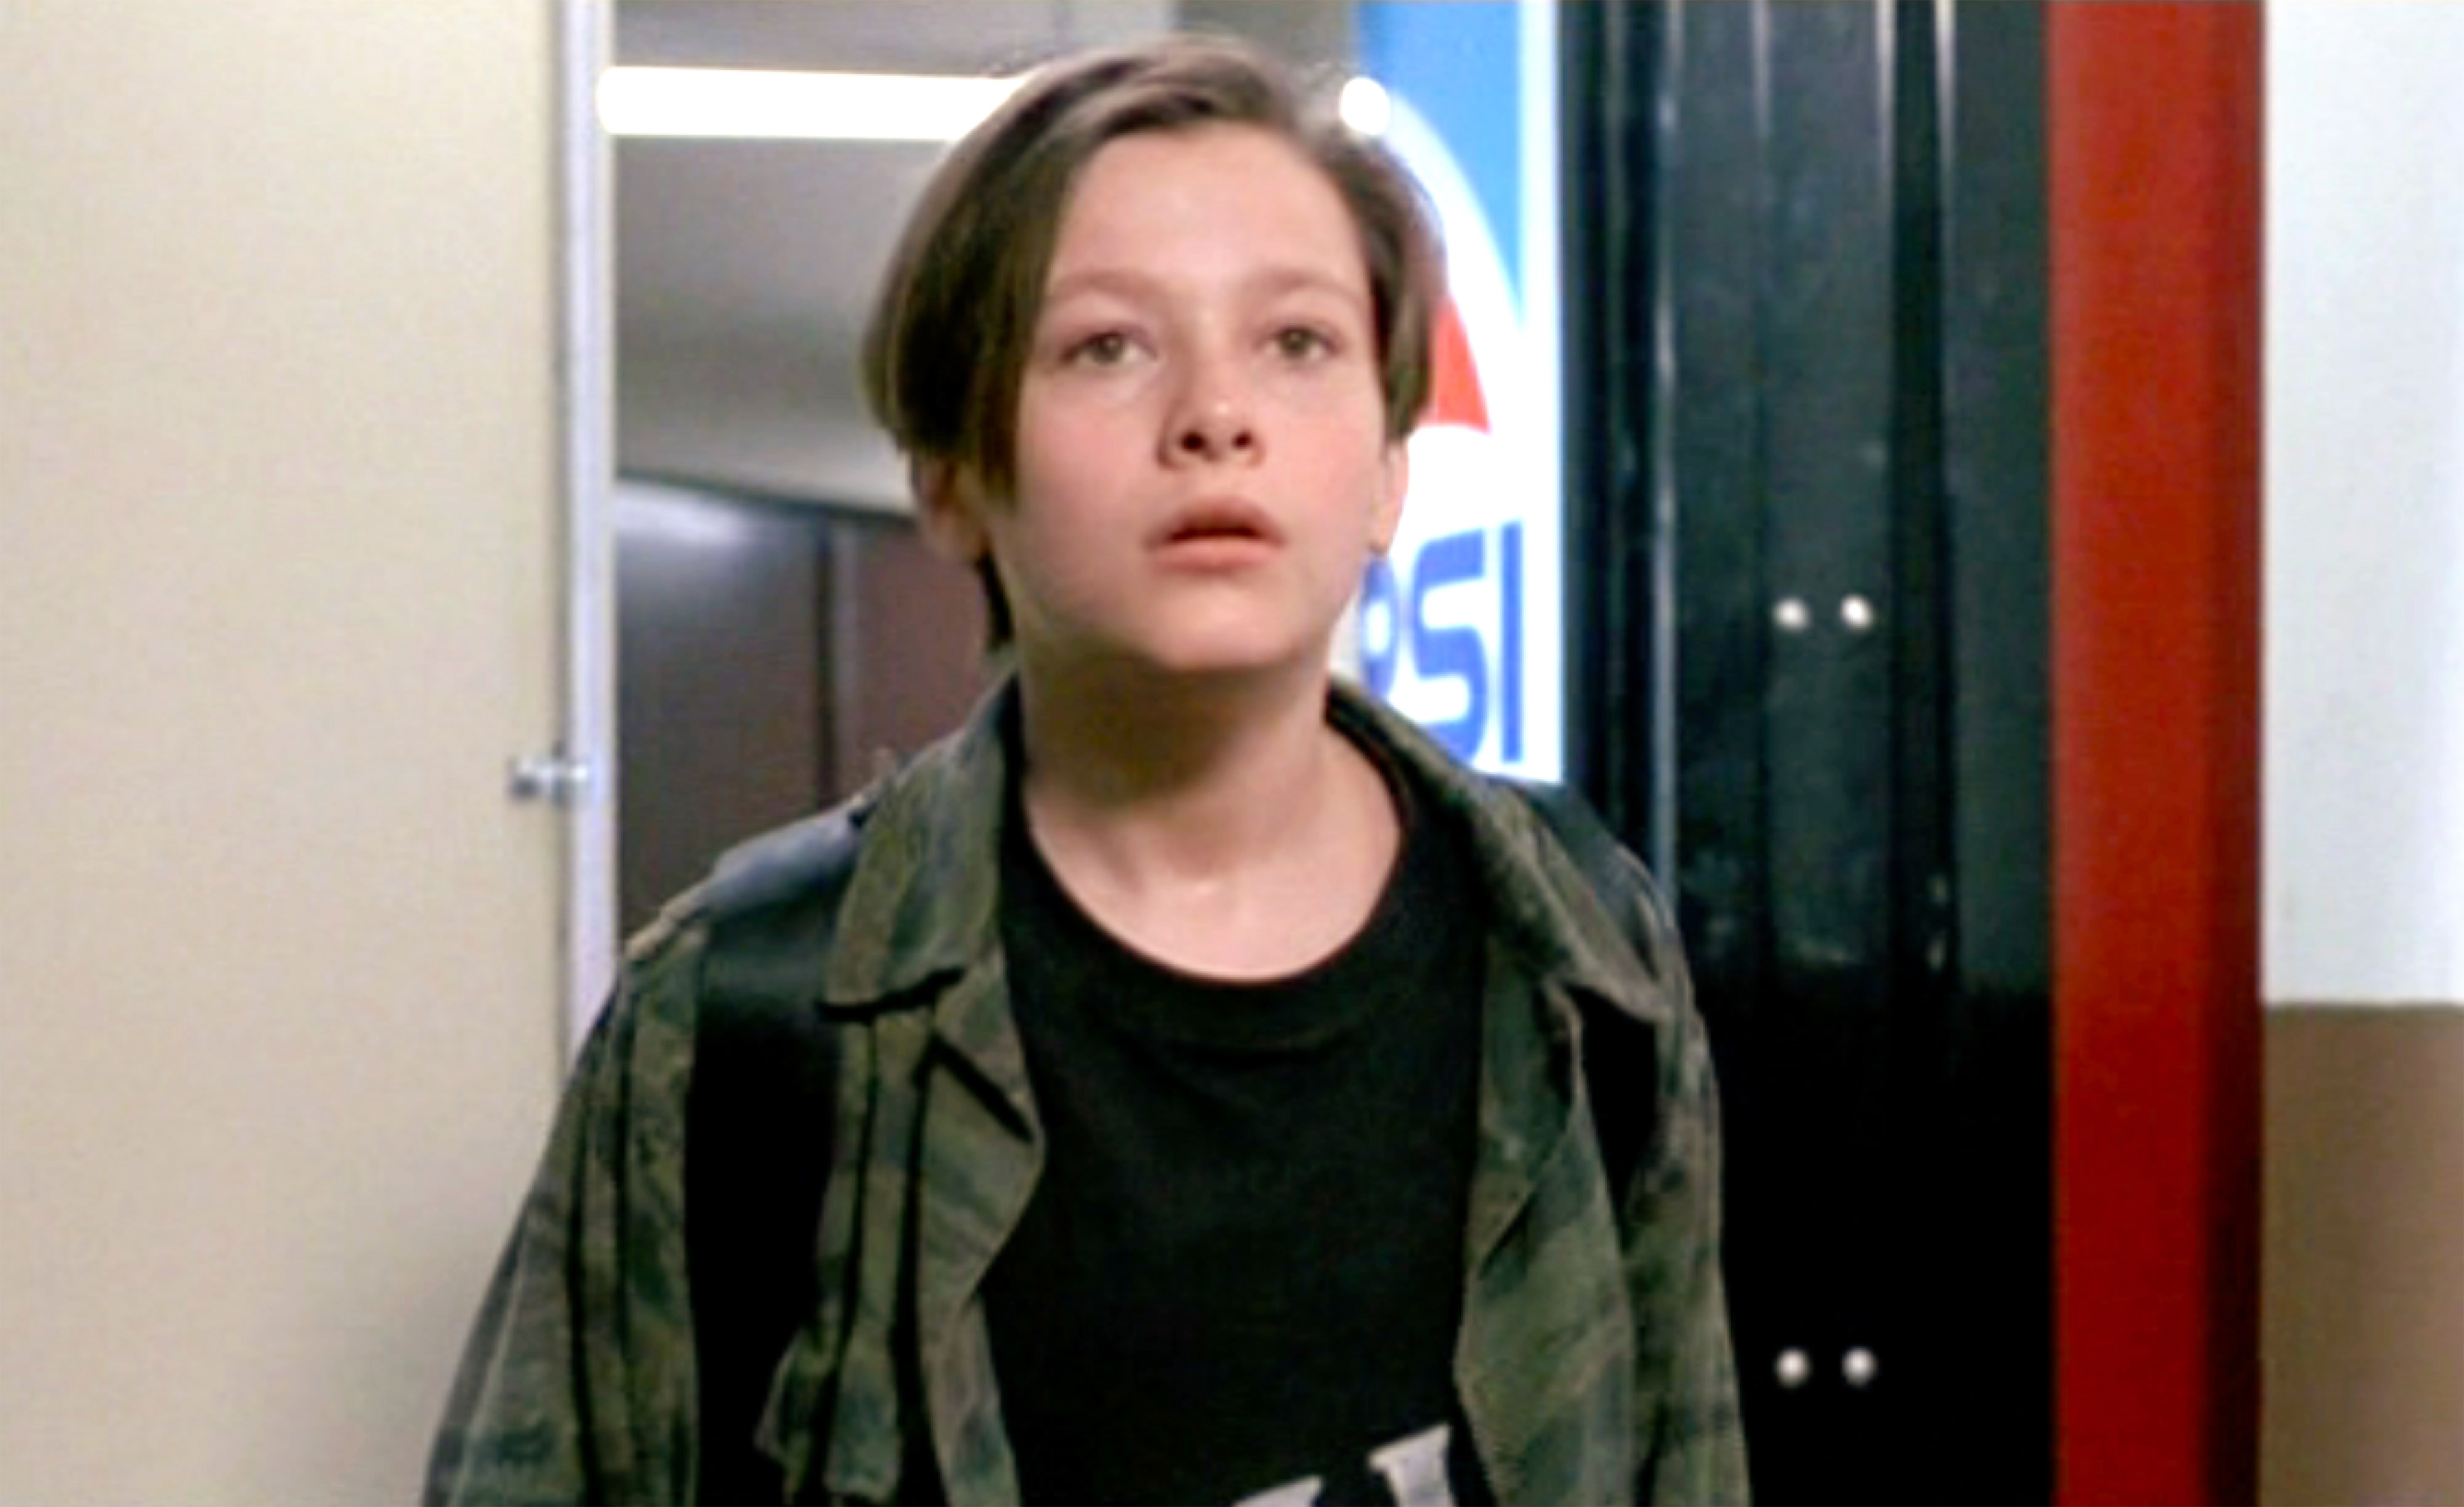 Edward Furlong as John Connor on "Terminator 2: Judgment Day" | Source: Getty Images